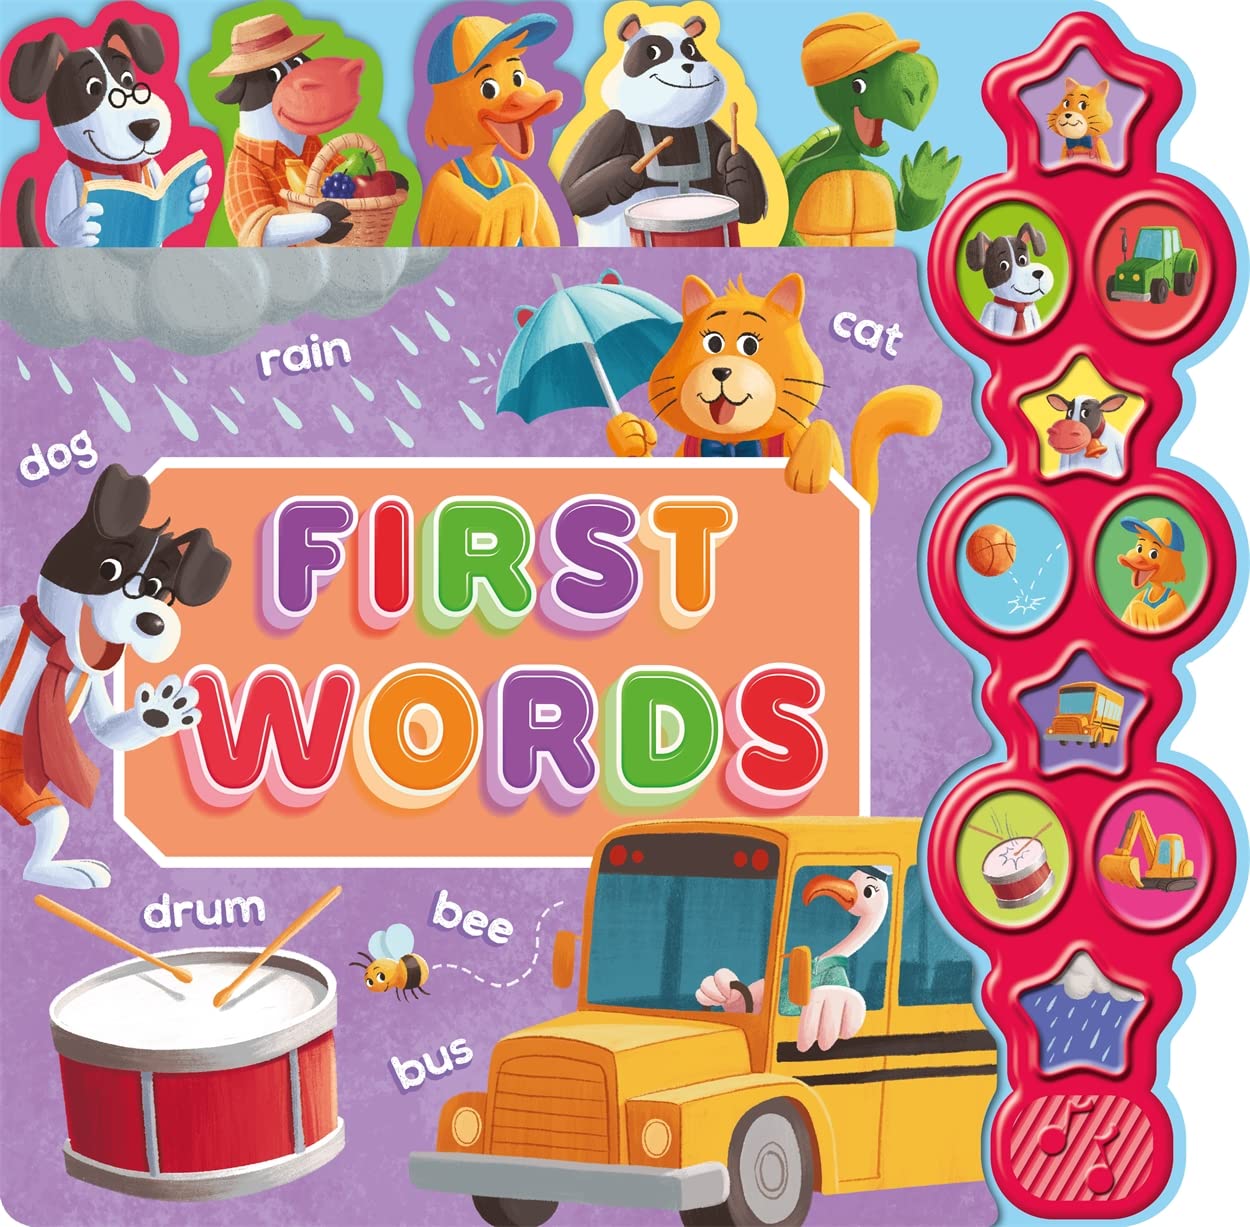 First Words Book